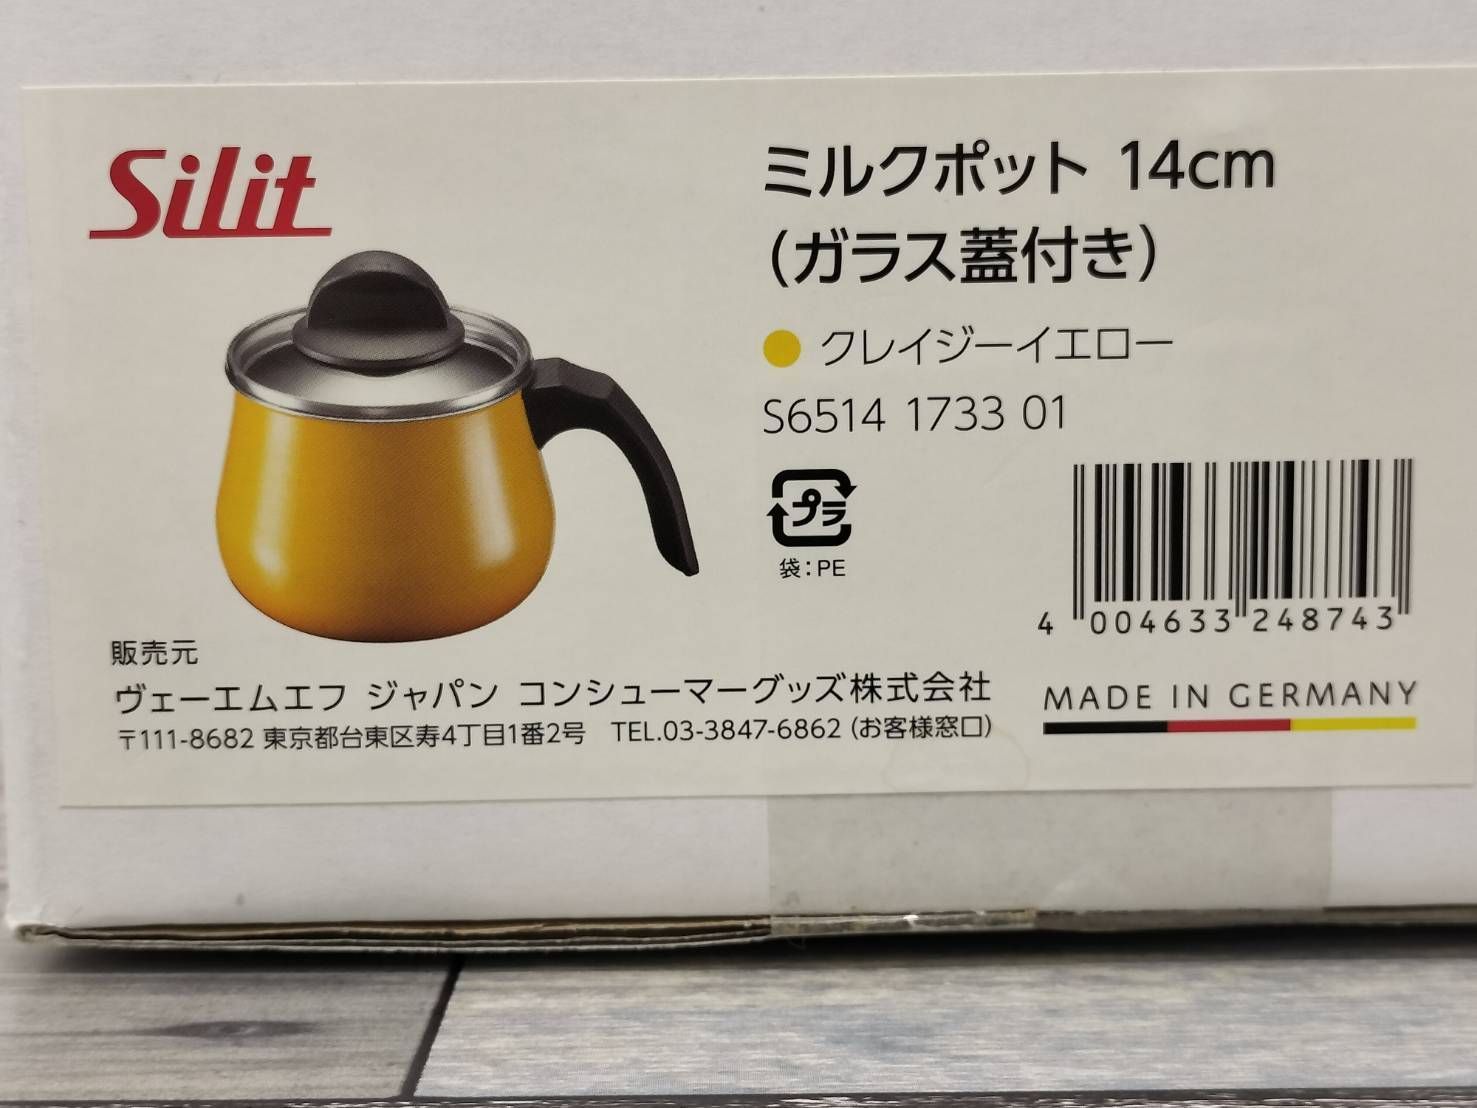 silit made in germany ミルクポット-